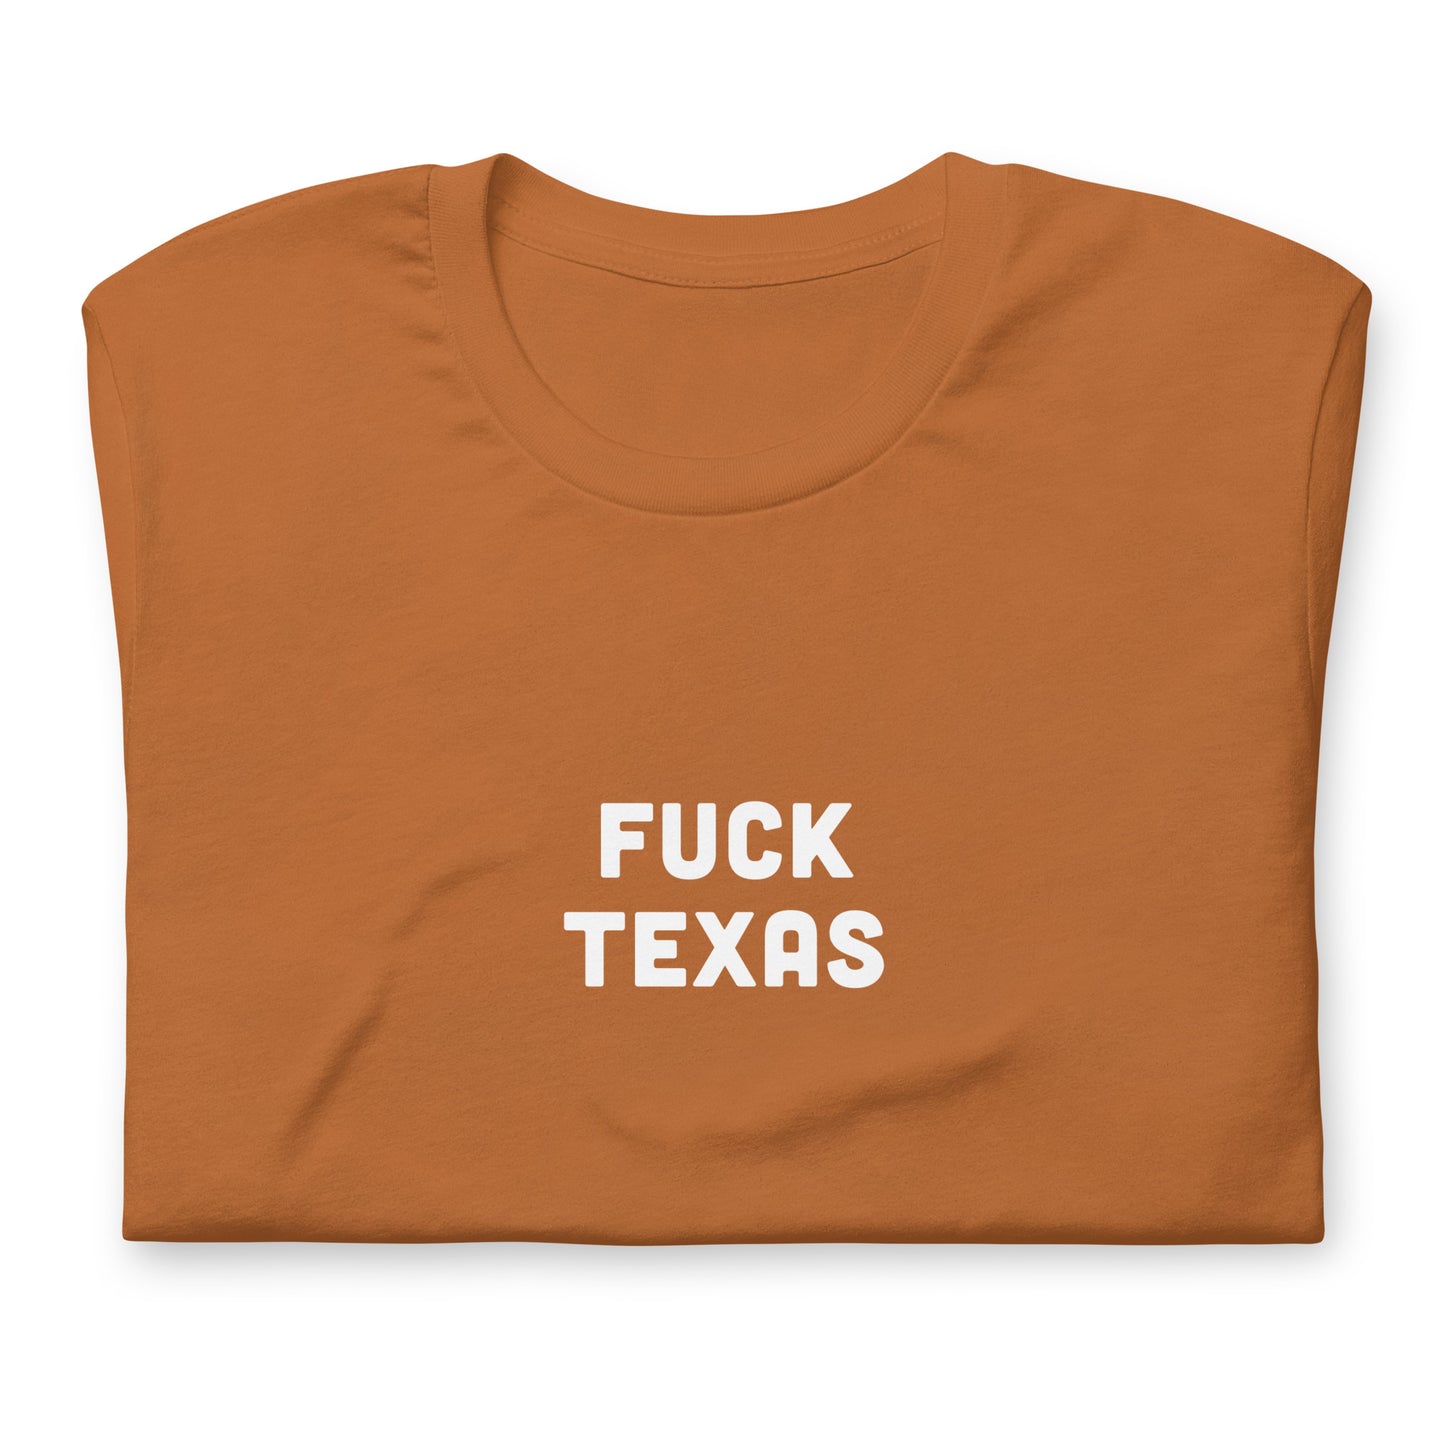 Fuck Texas T-Shirt Size M Color Forest